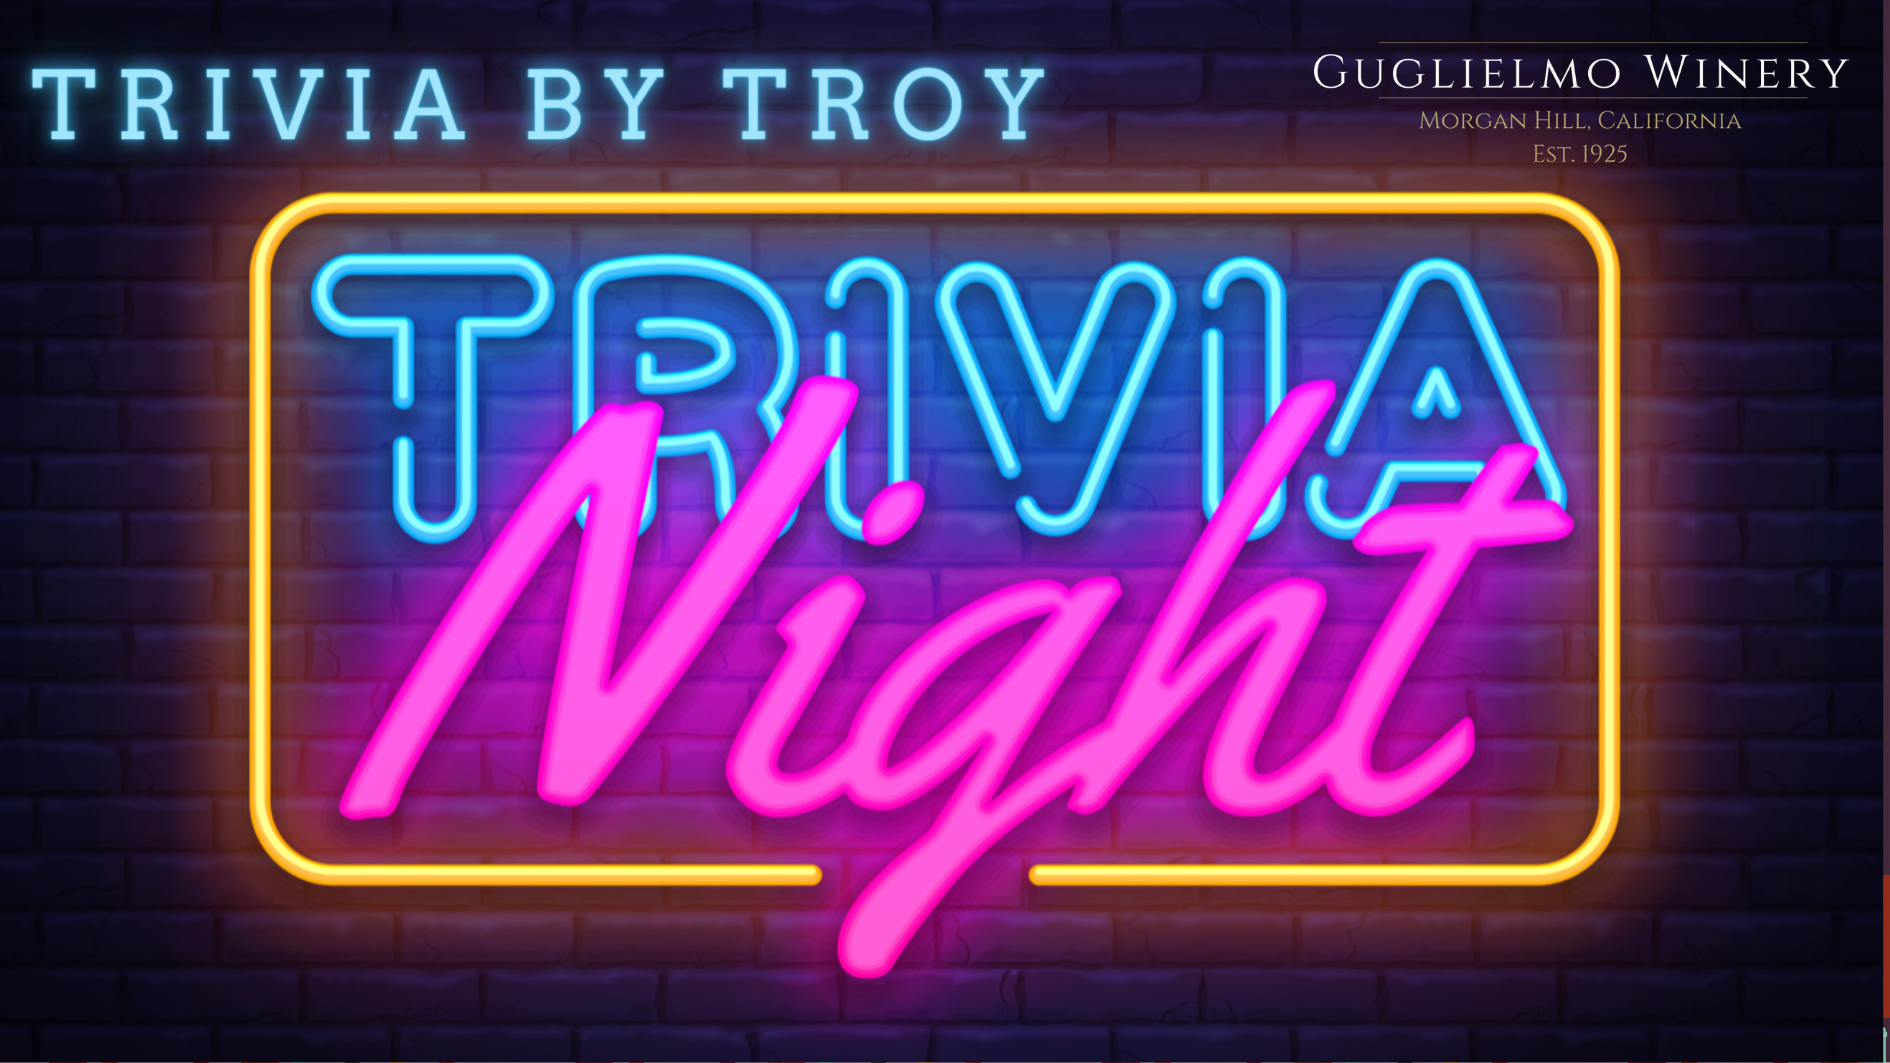 Trivia by Troy at Guglielmo Winery